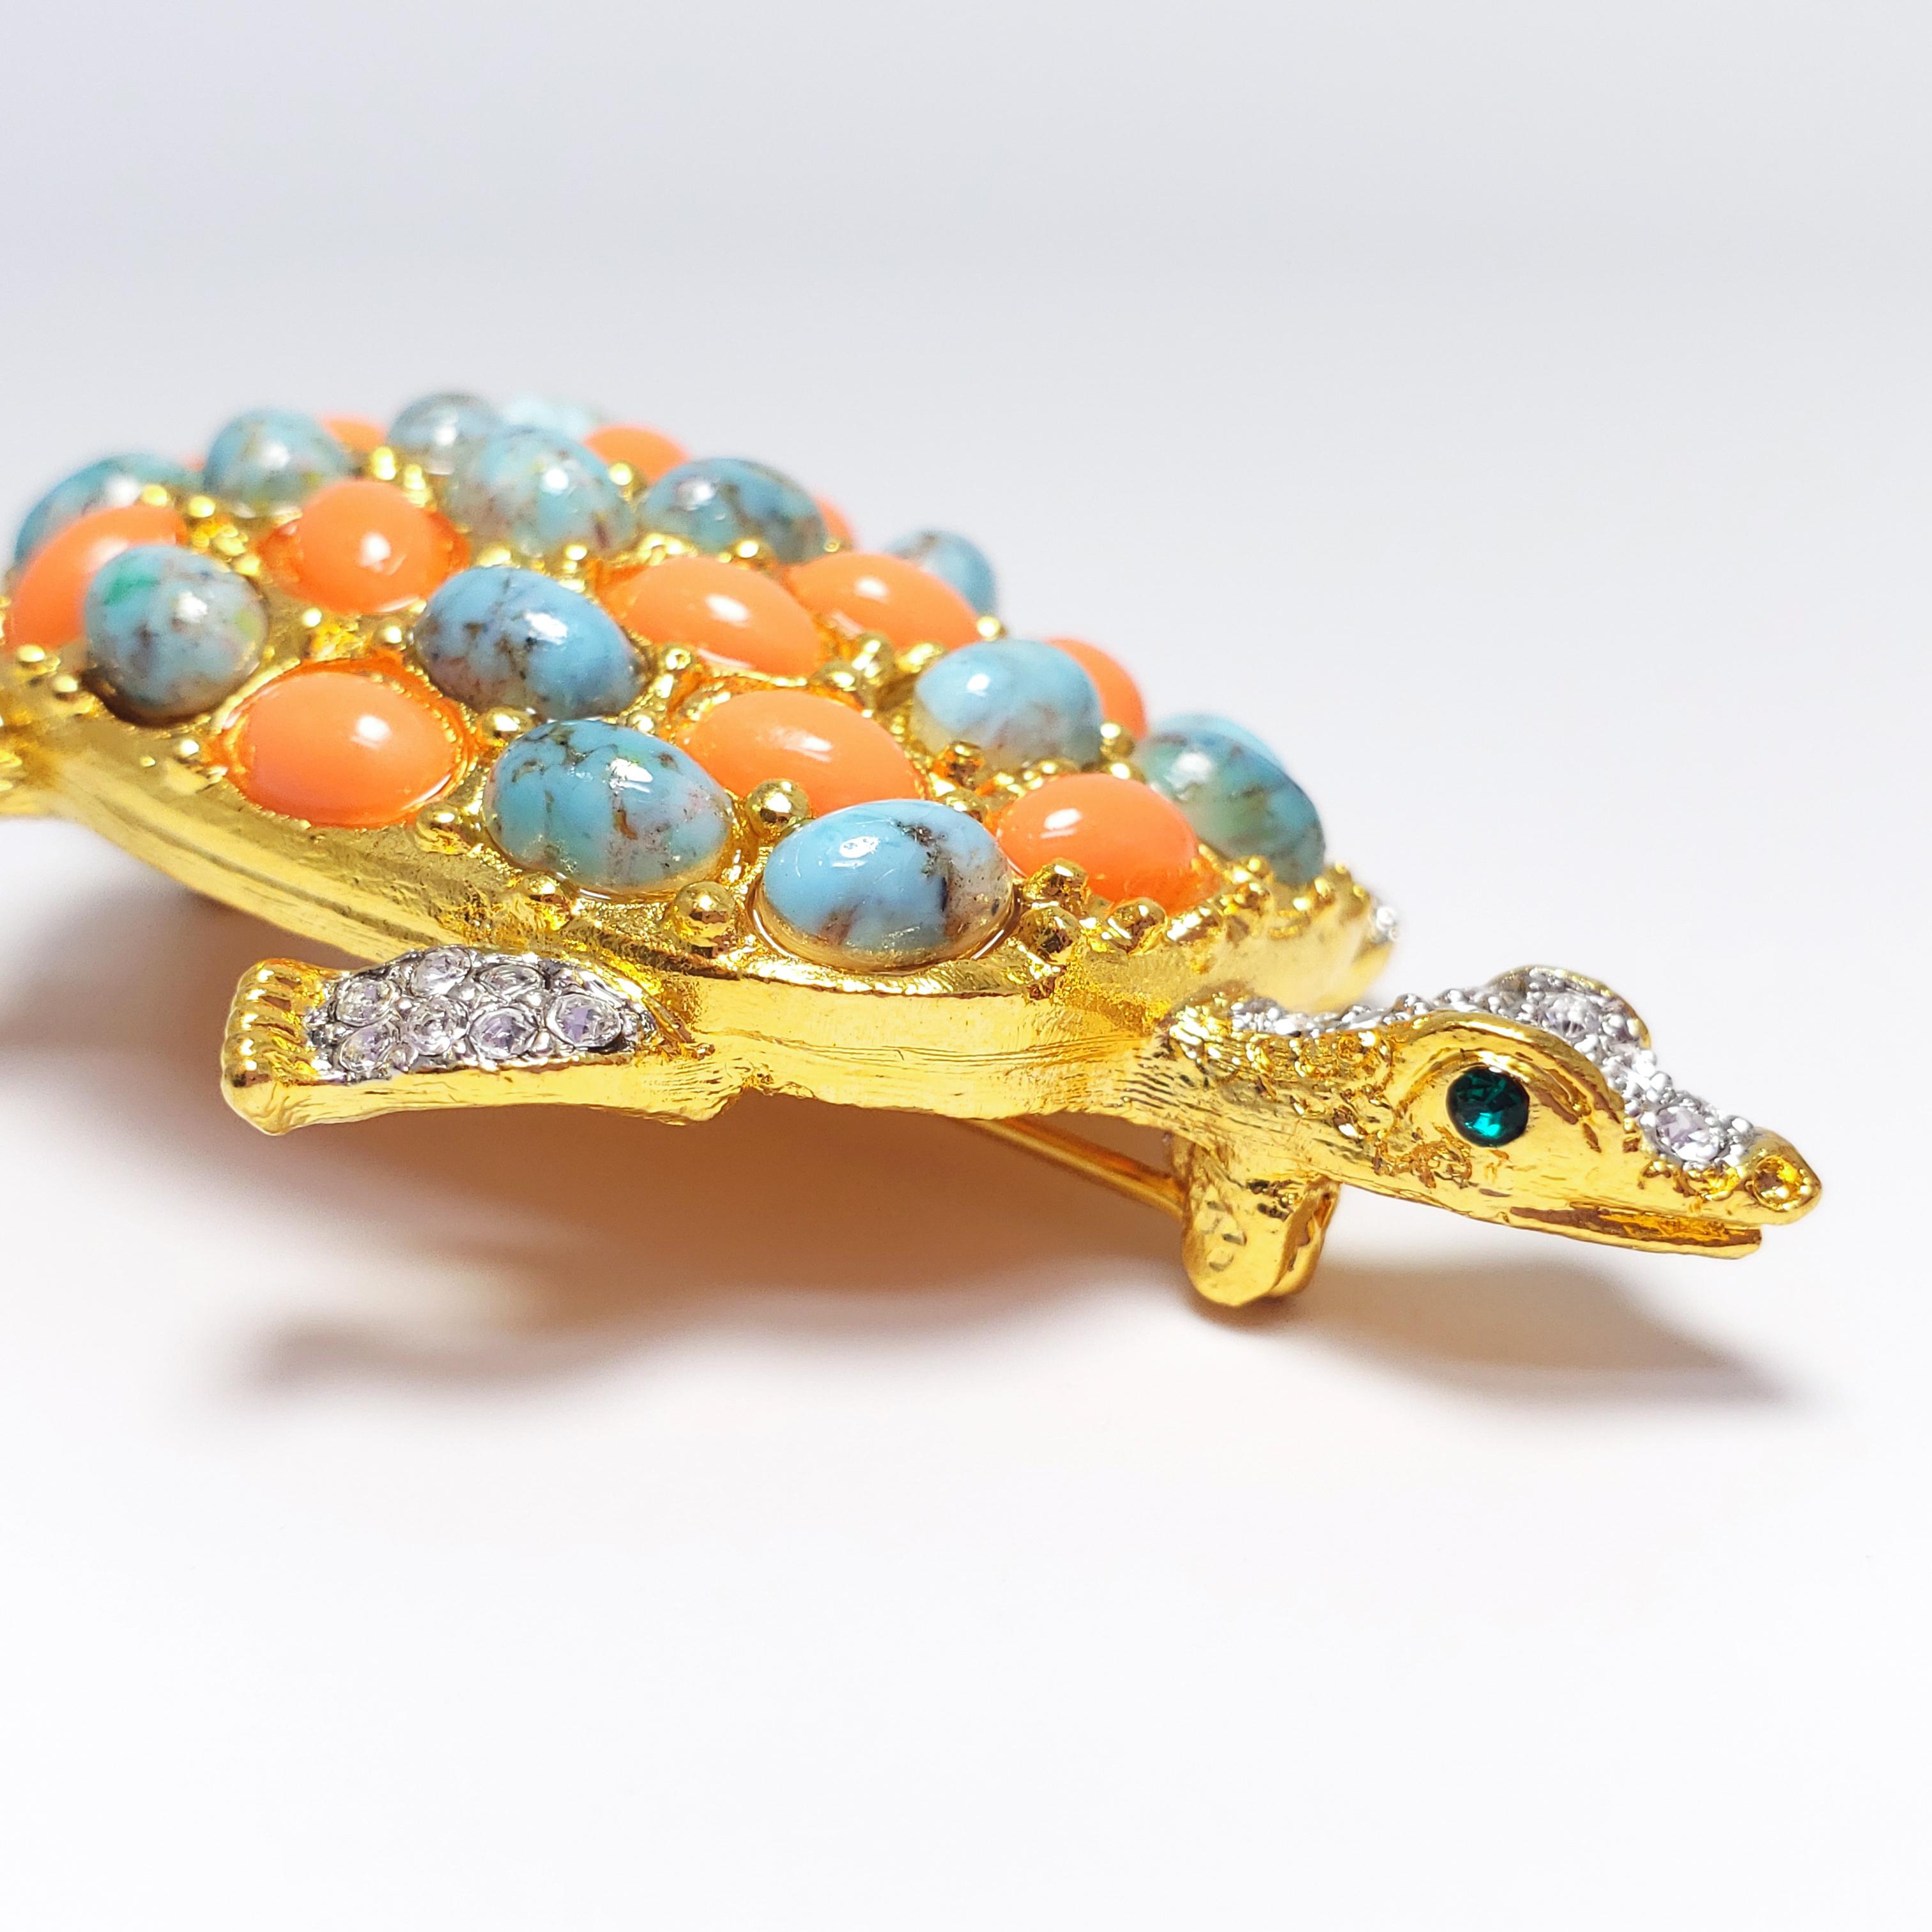 KJL Kenneth Jay Lane Pave Cabochon & Crystal Turtle Brooch Pin in Gold 1